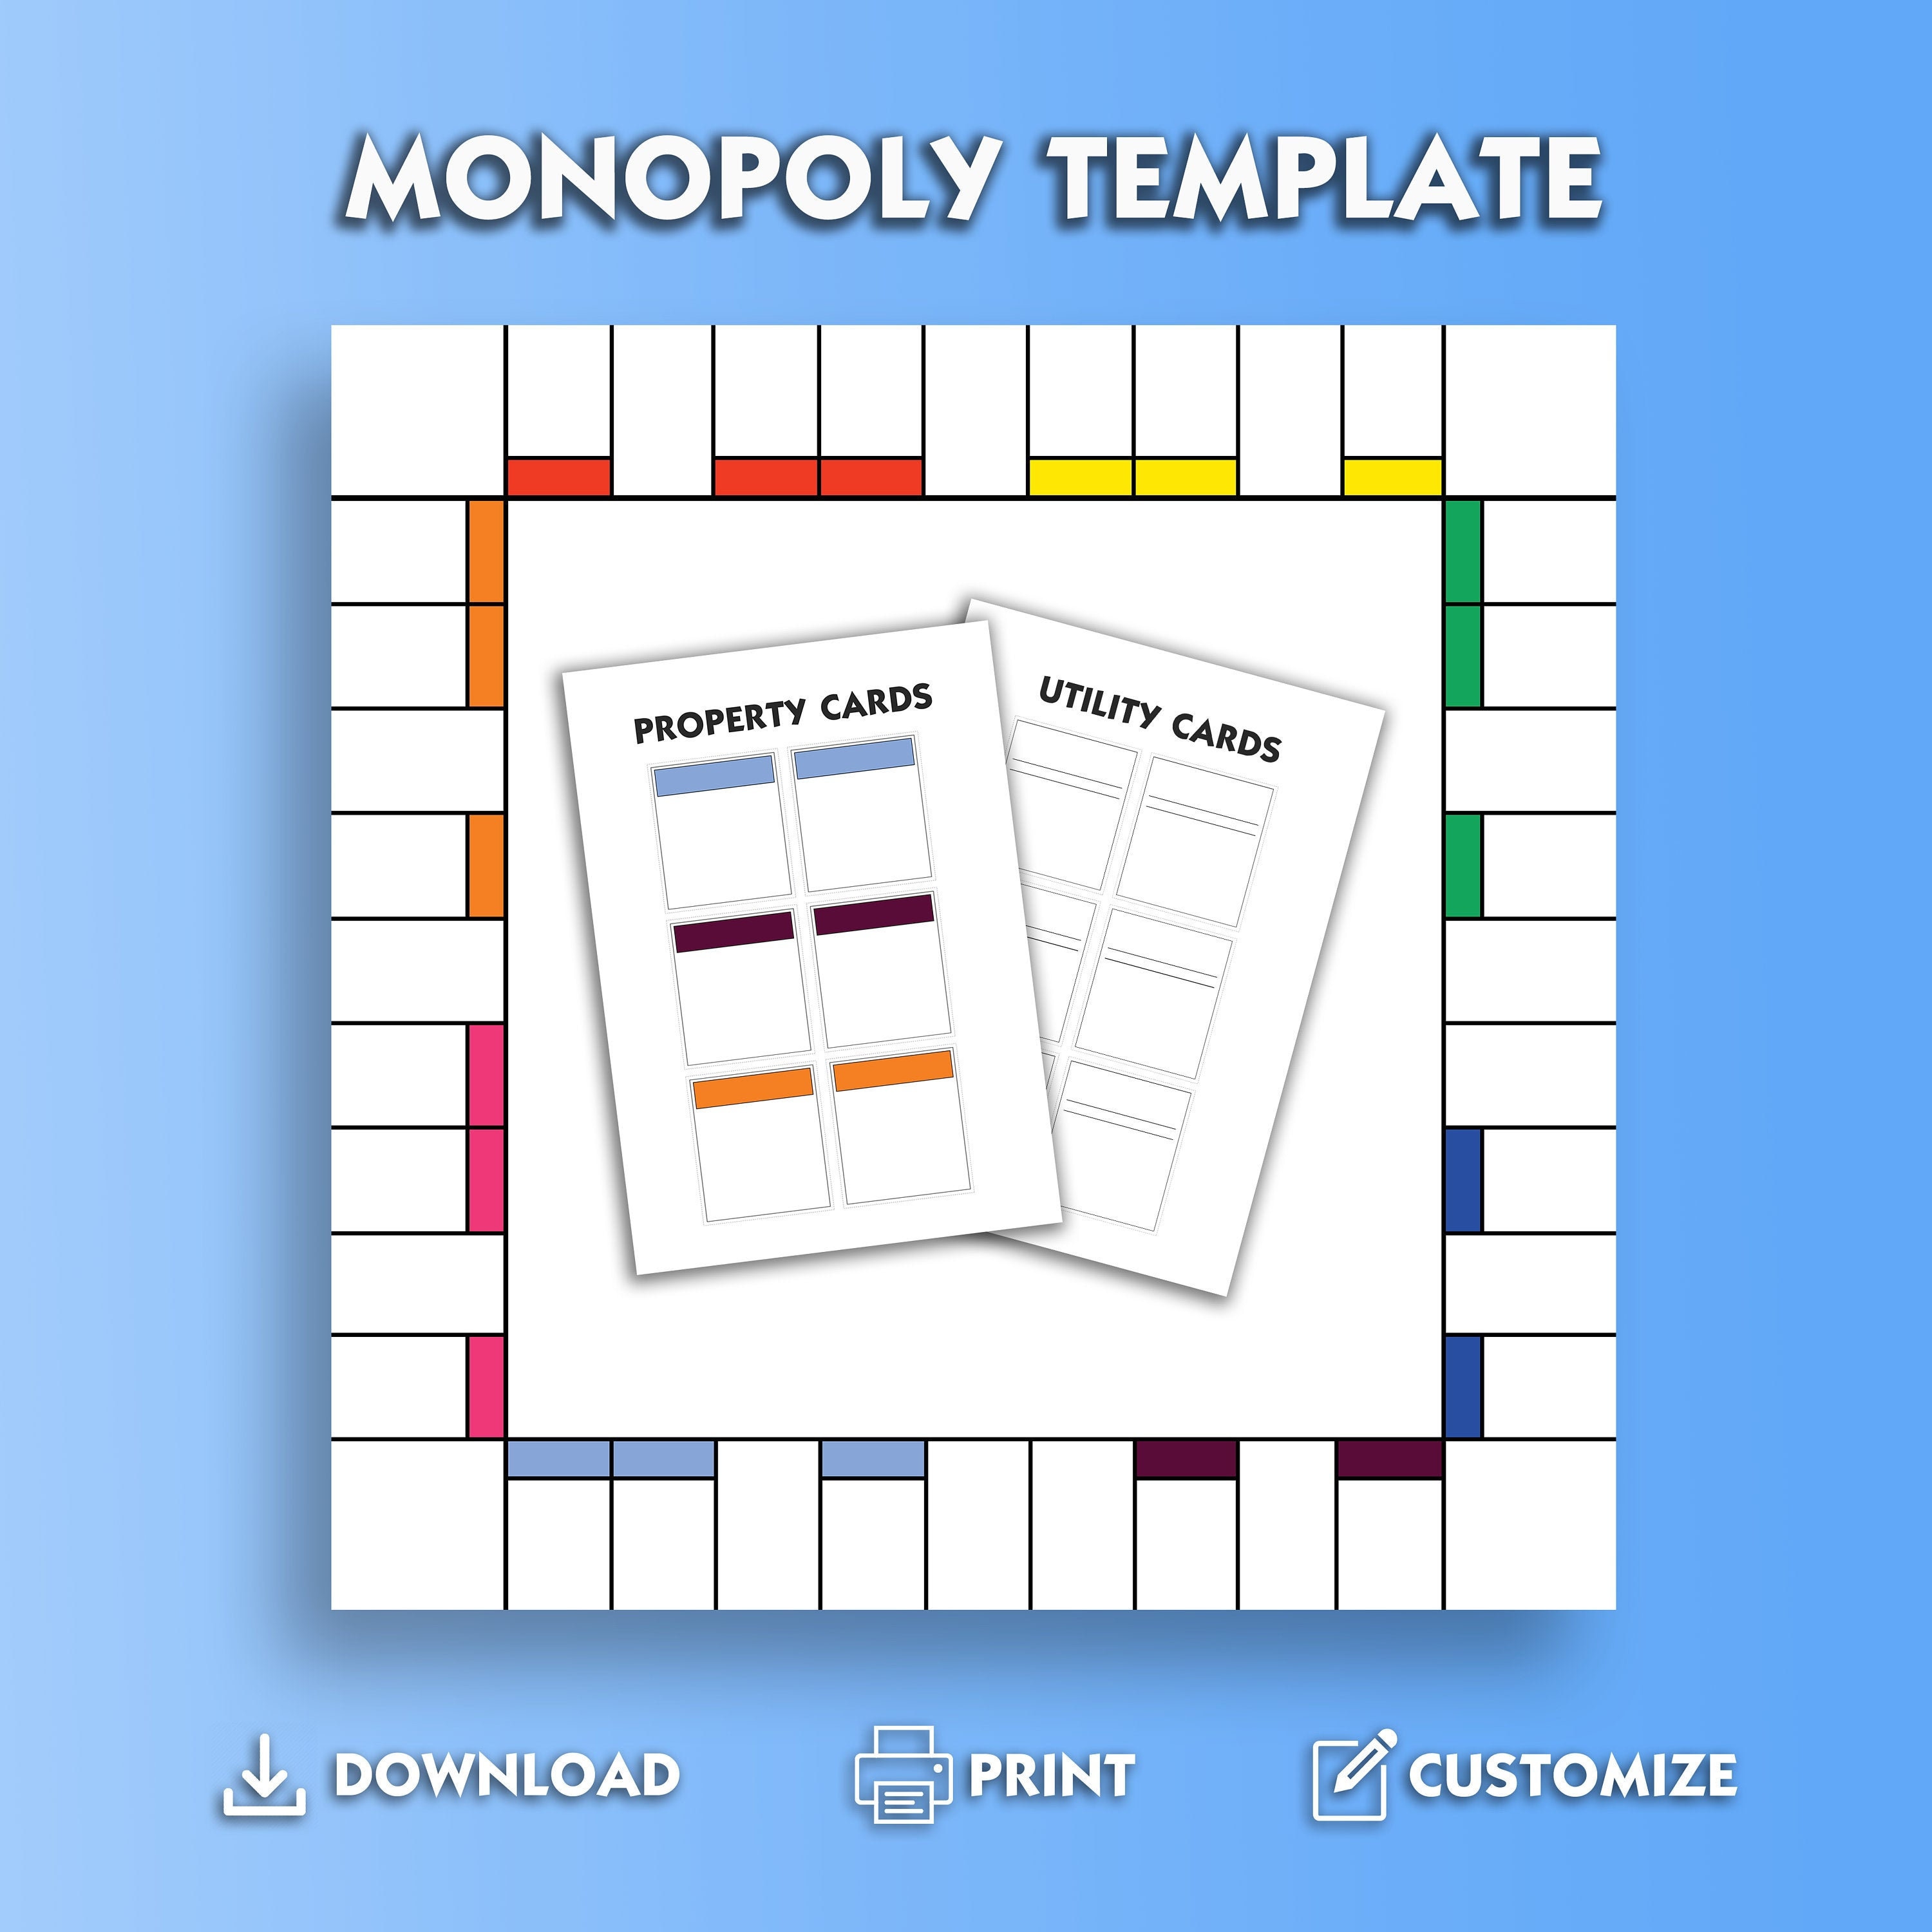 Clear Monopoly Template Personalized Monopoly Board Template Etsy